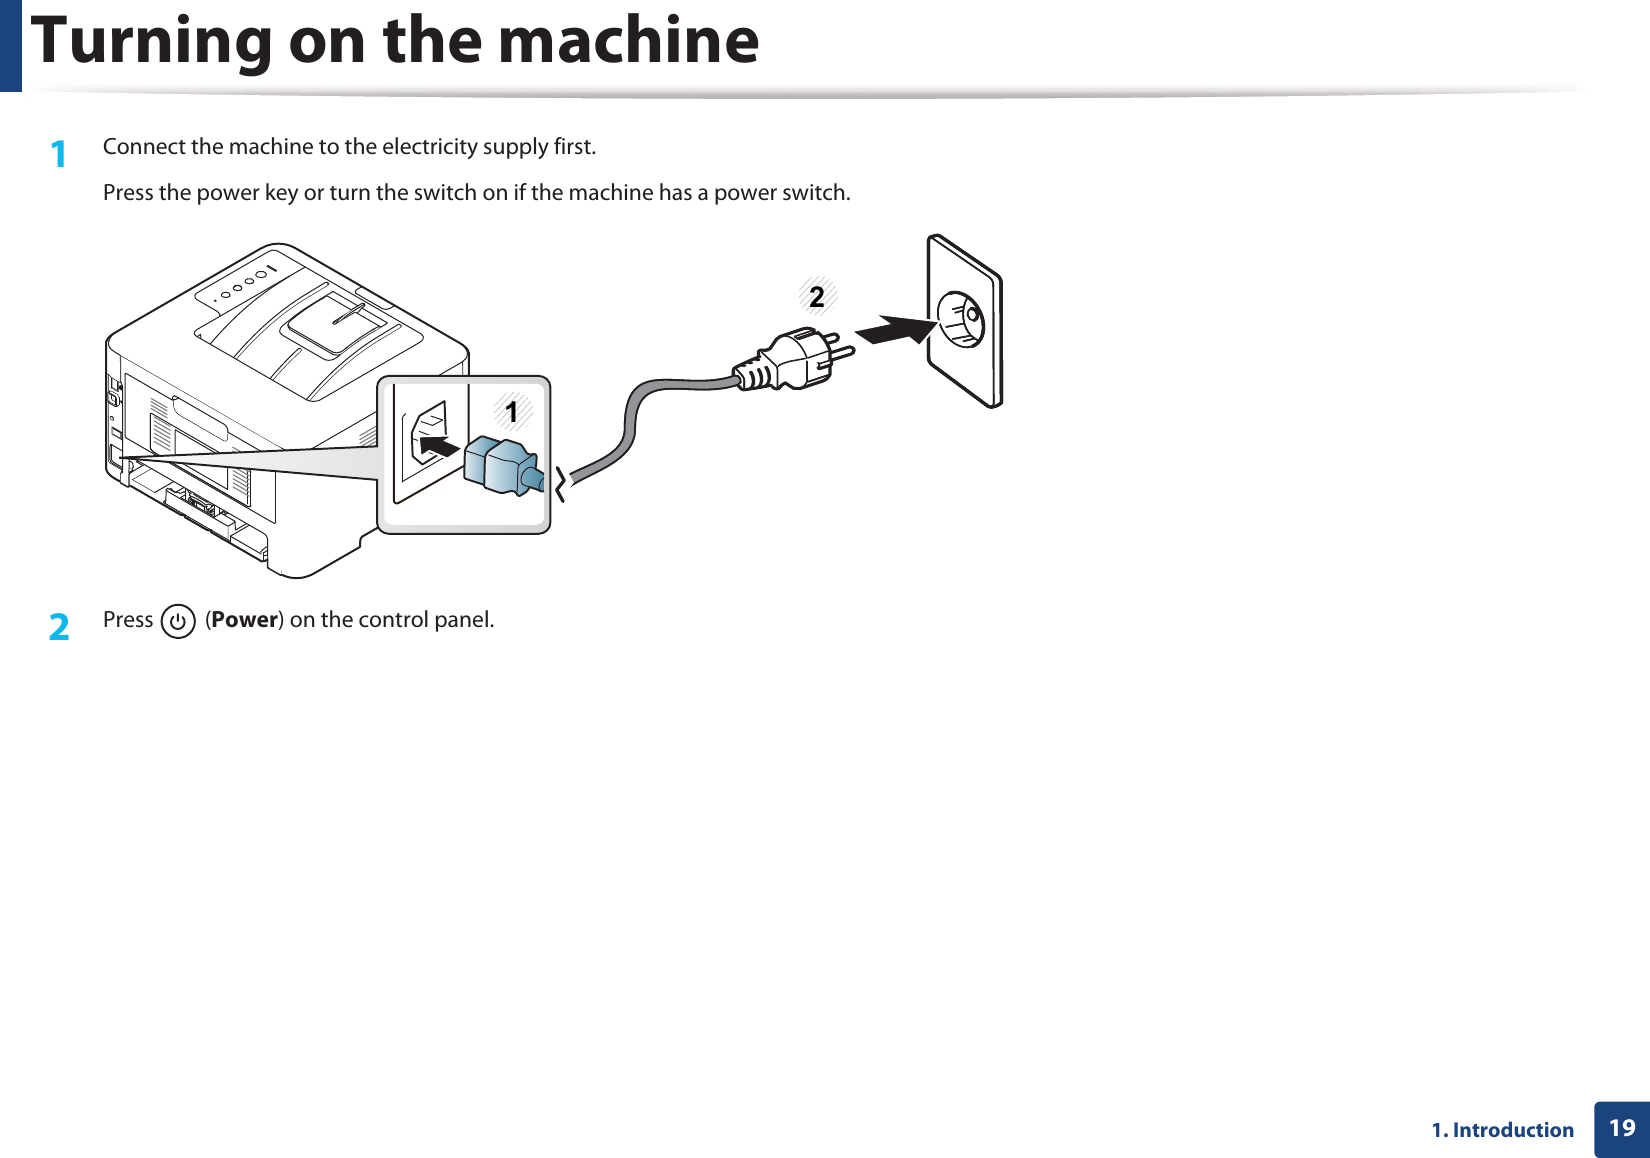 191. IntroductionTurning on the machine1Connect the machine to the electricity supply first.Press the power key or turn the switch on if the machine has a power switch.2  Press  (Power) on the control panel.12